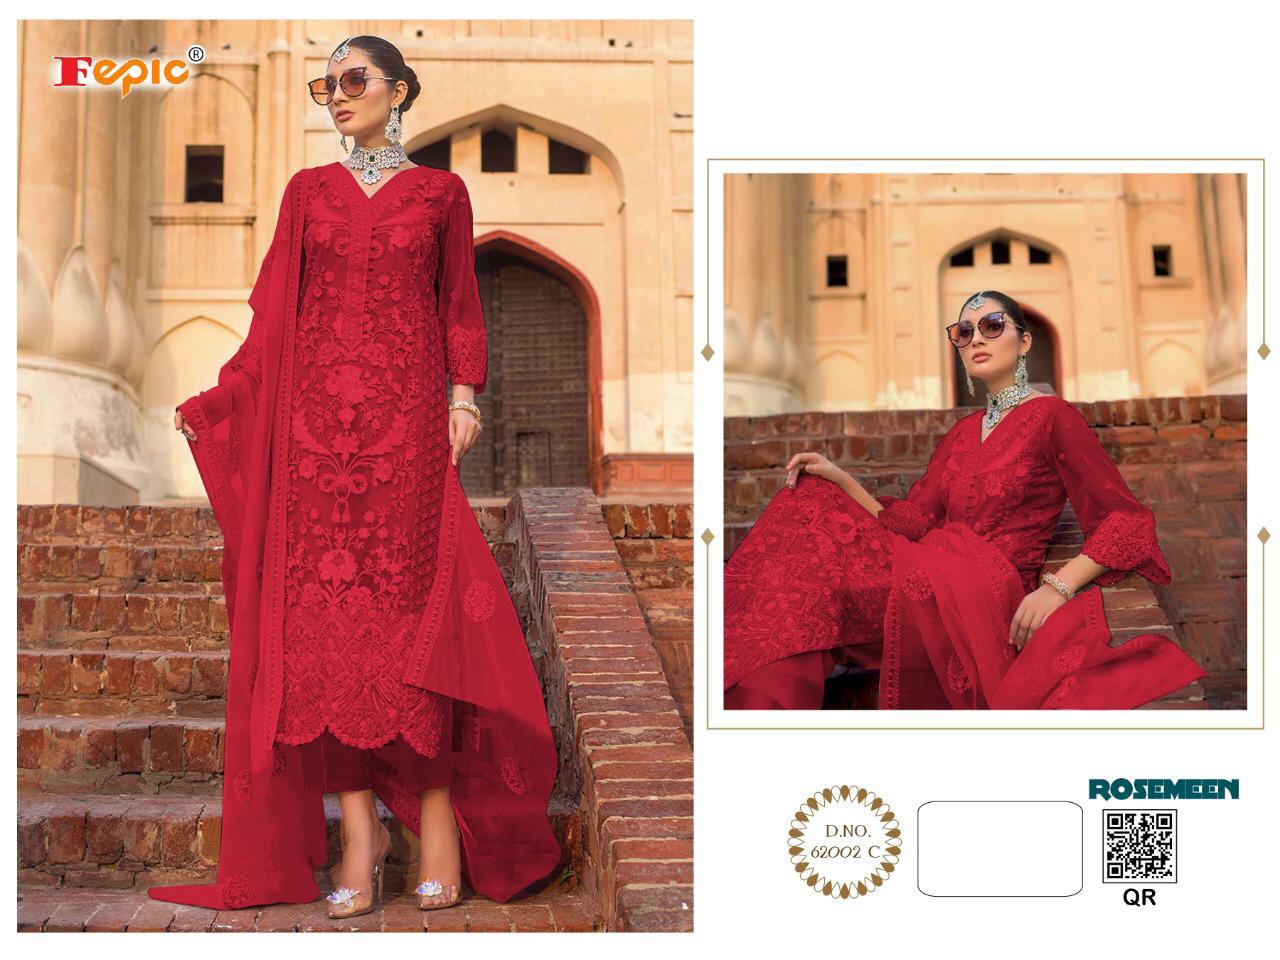 Fepic rosemeen zC 19 innovative style beautifully designed Pakistani concept Salwar suits